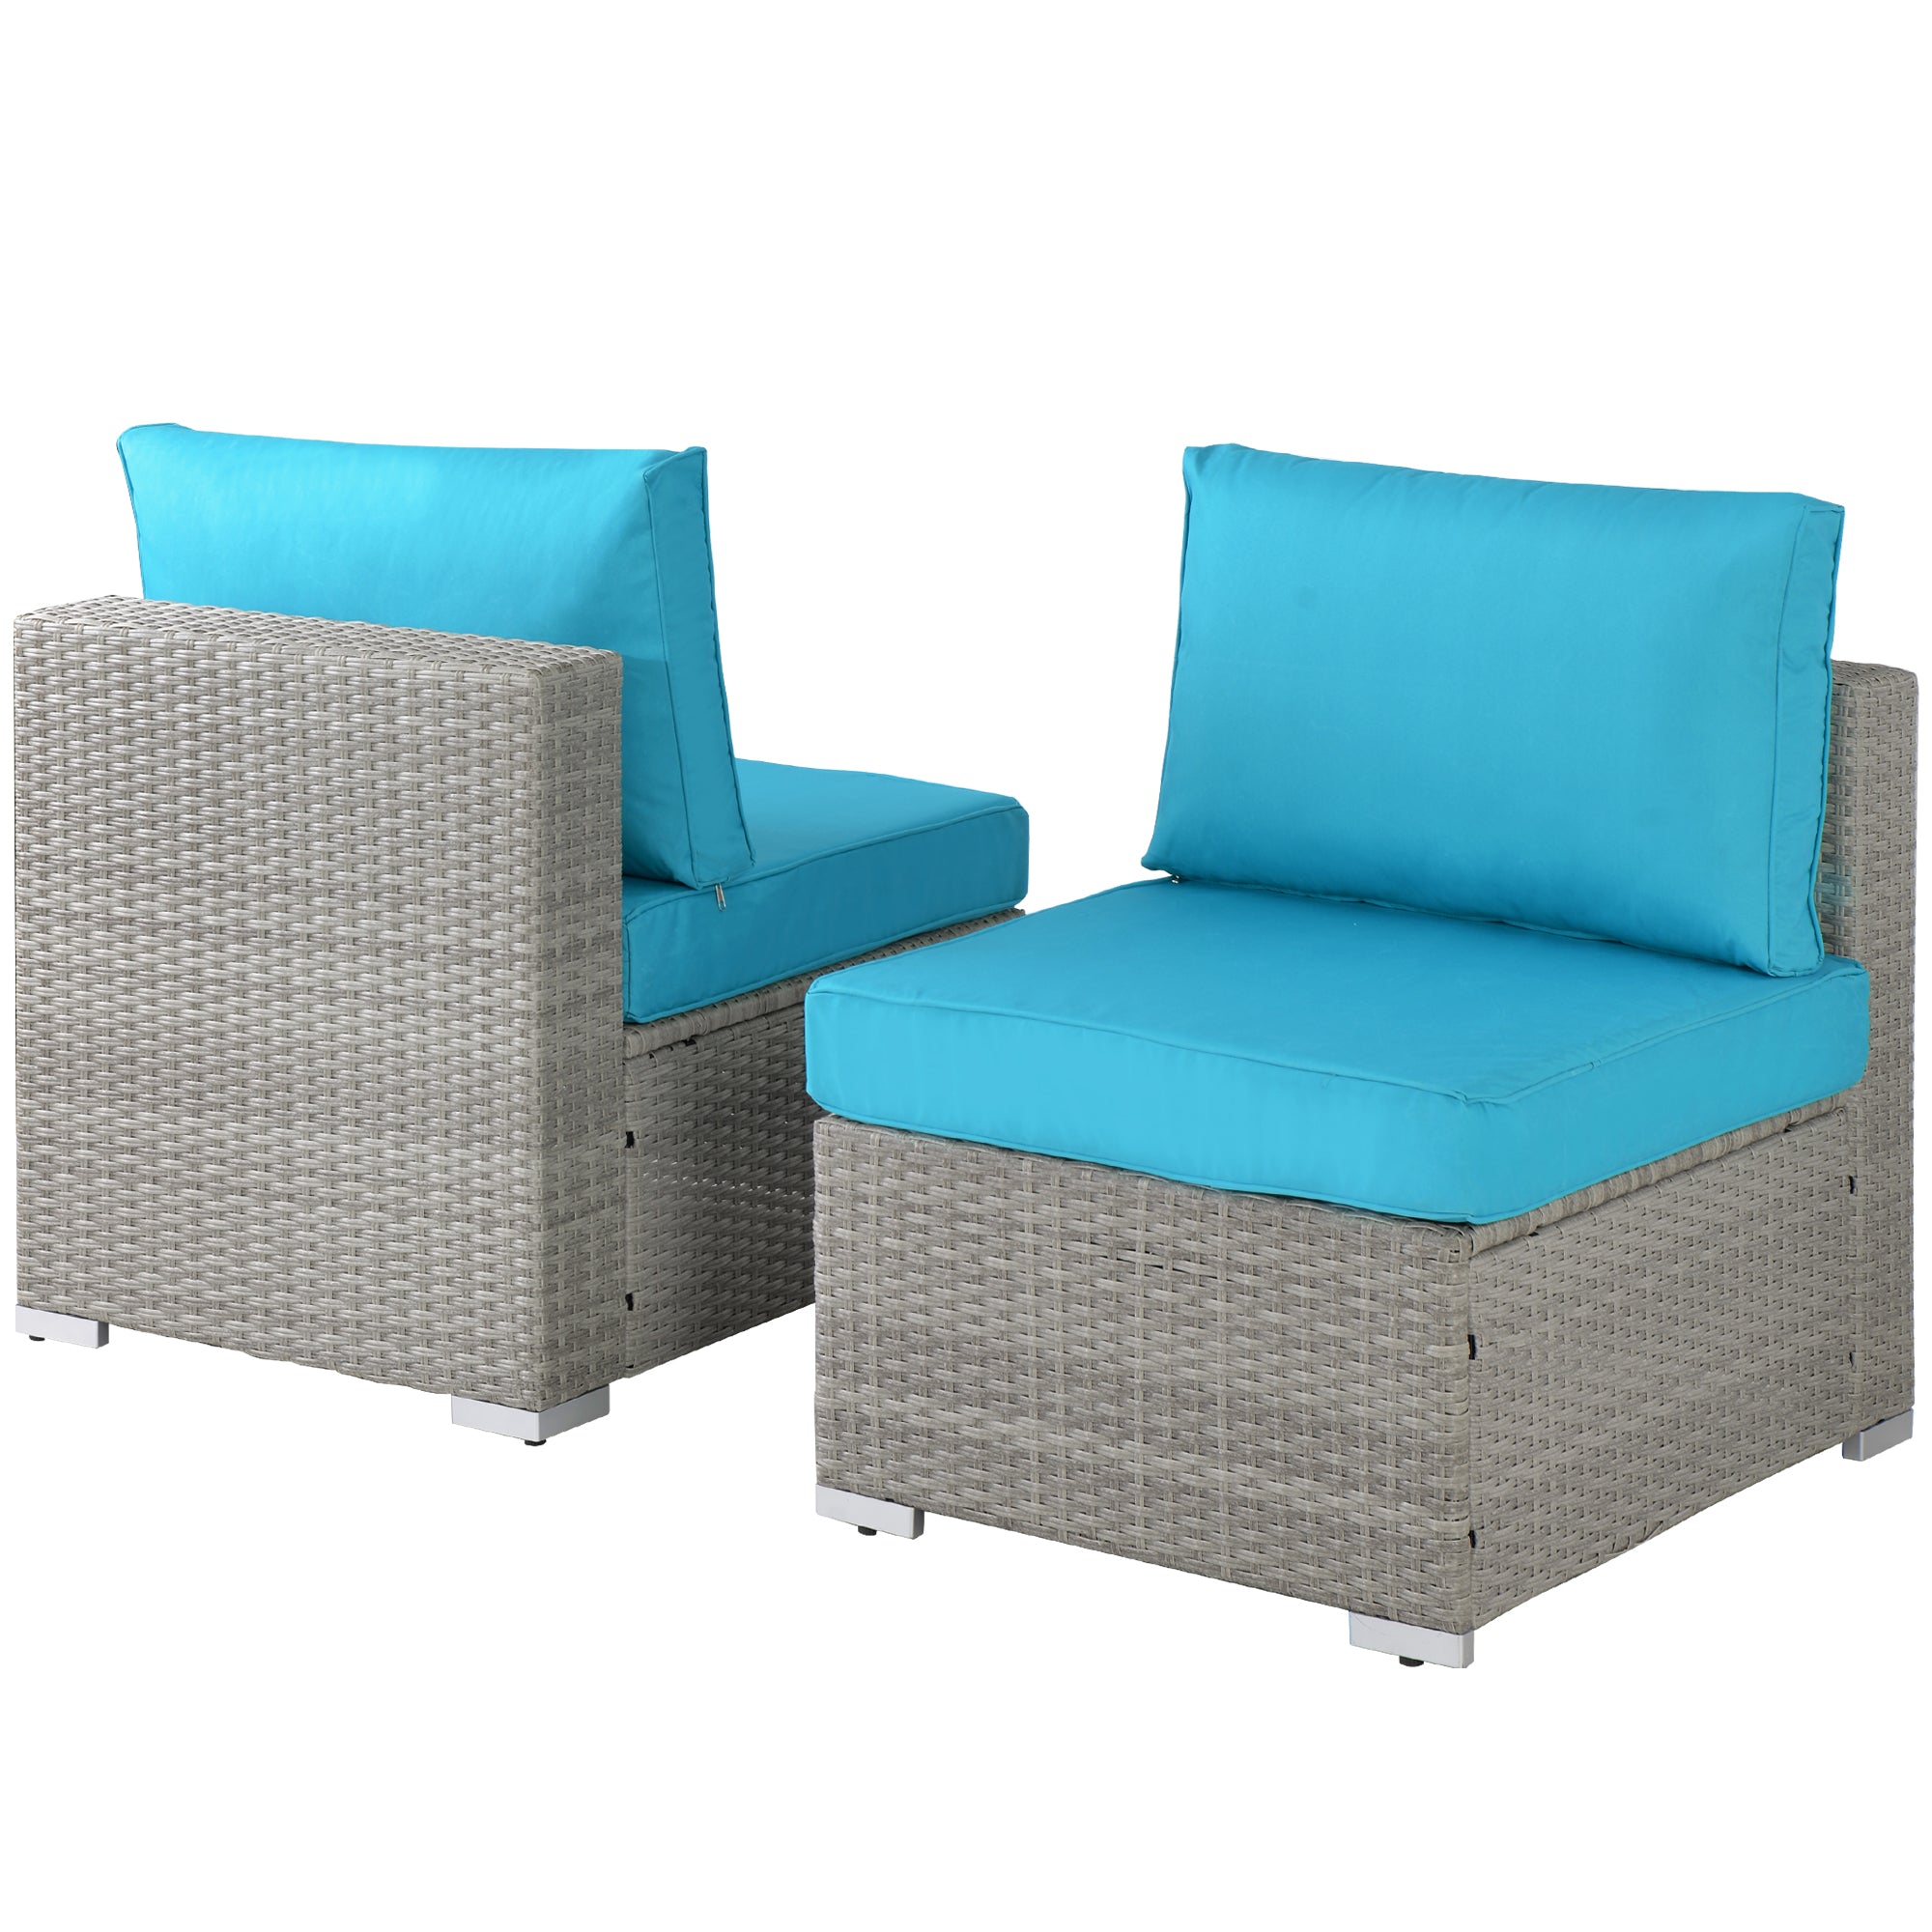 ZNTS Outdoor Garden Patio Furniture 2-Piece PE Rattan Wicker Sectional Cushioned Sofa Chair with Cushions W21311905